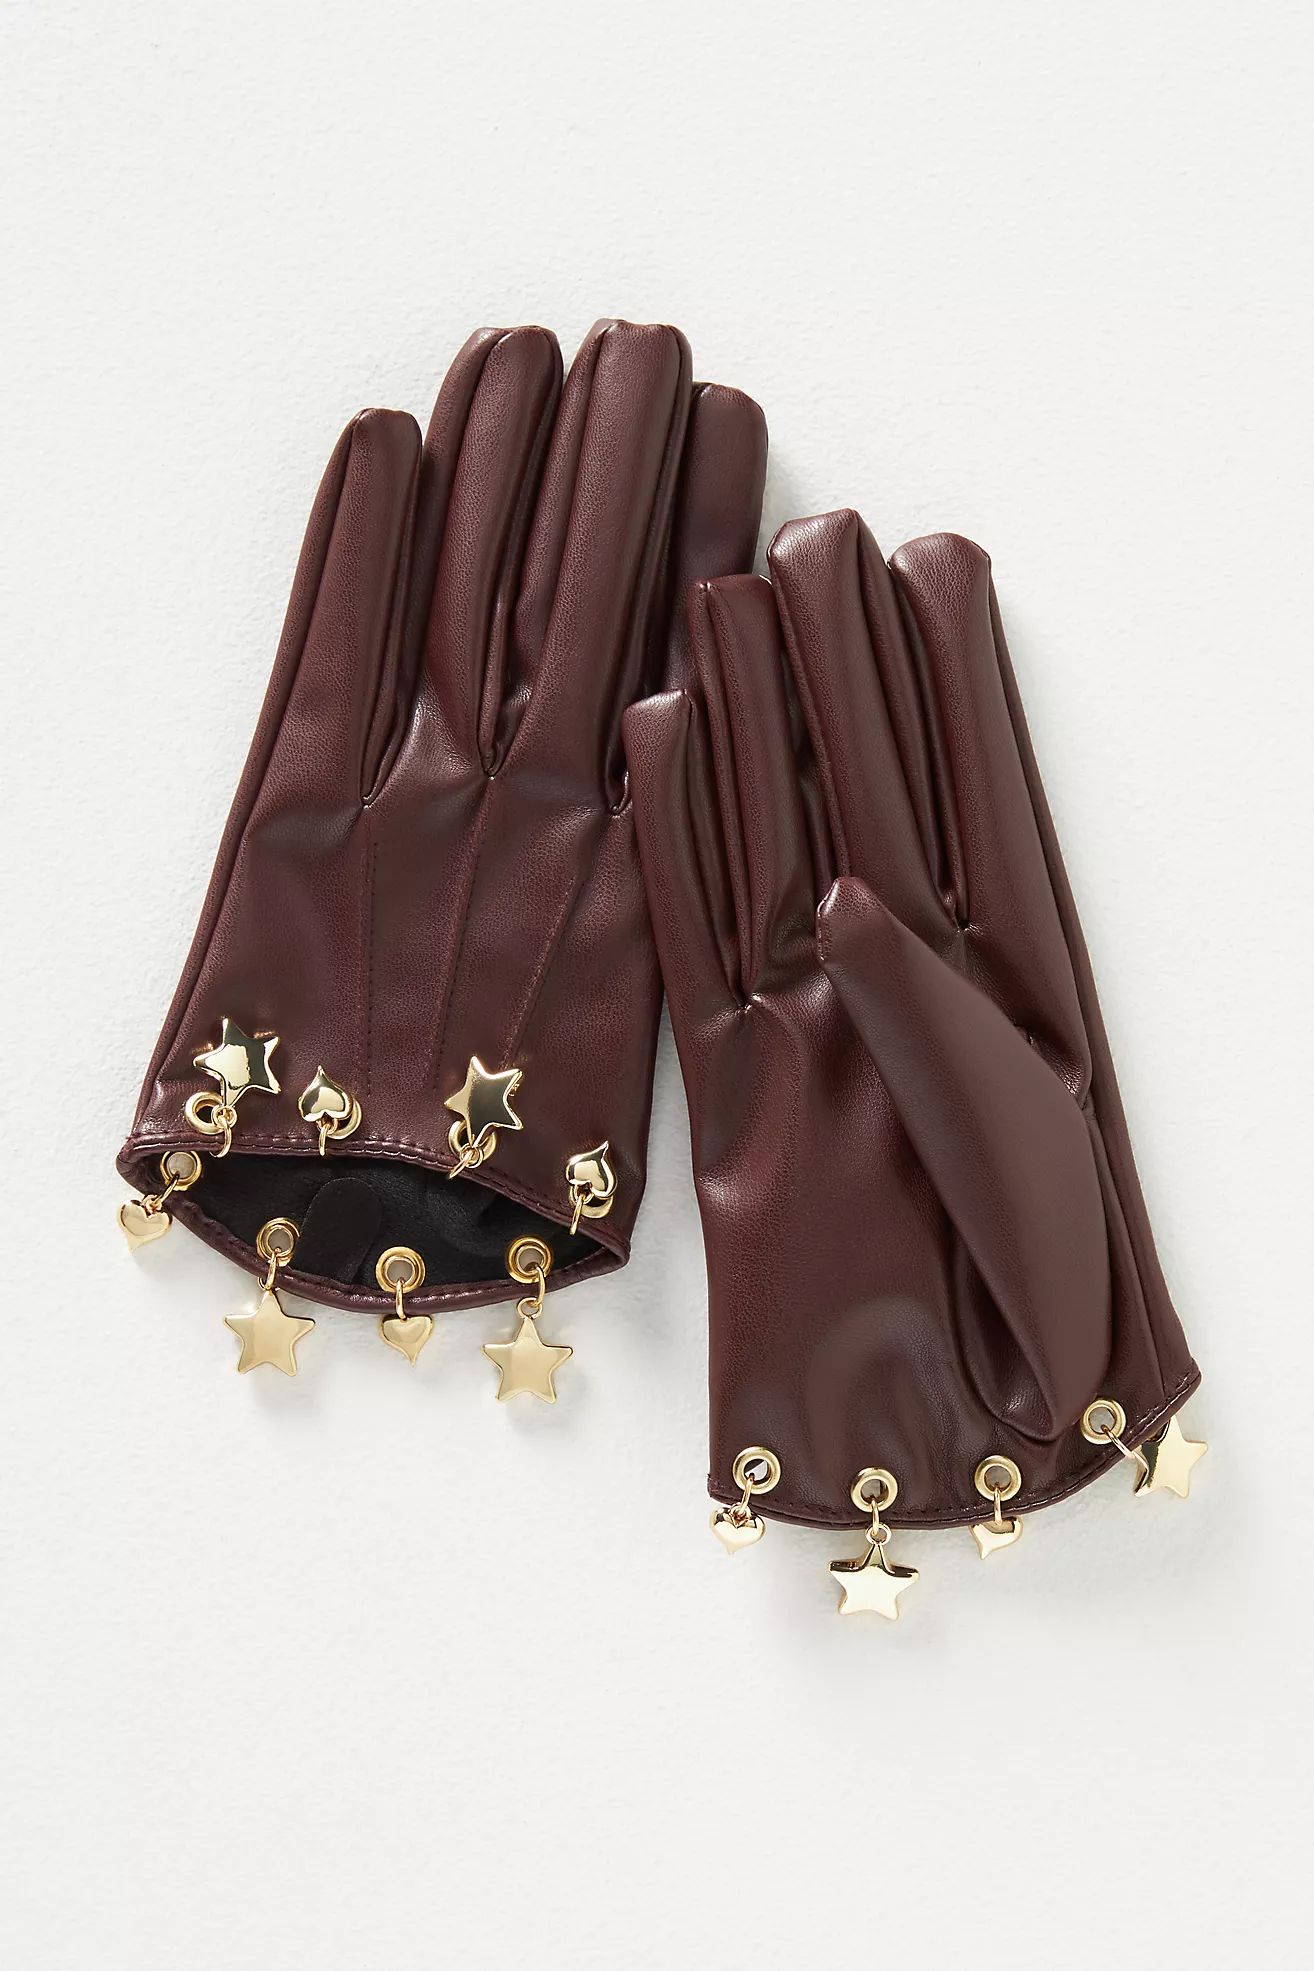 By Anthropologie Faux Leather Charm Gloves | Anthropologie (US)